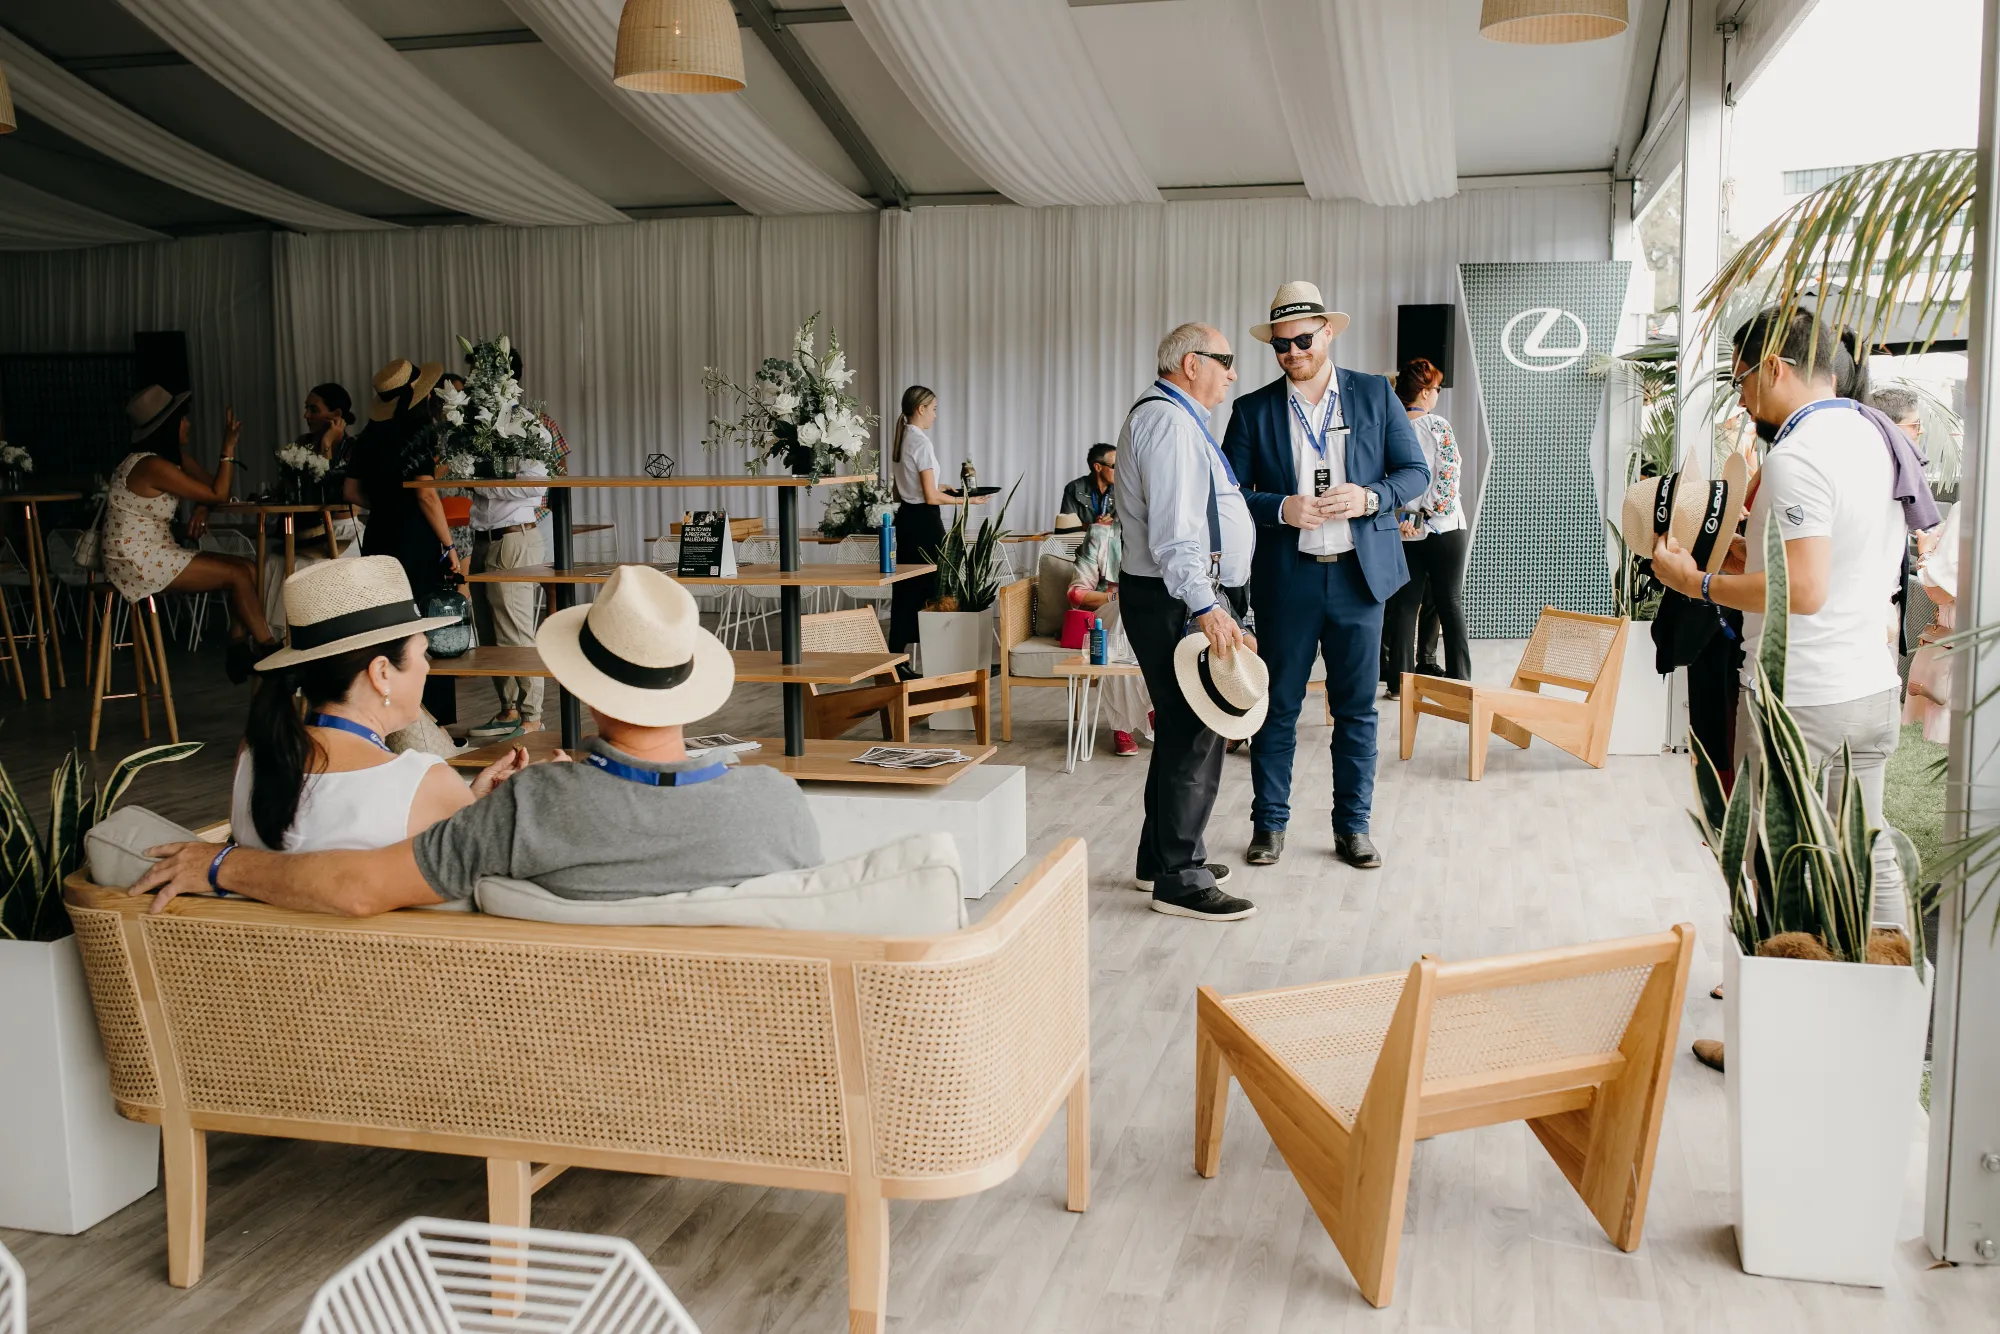 Guests socialising inside the Lexus tent at Lexus Urban Polo, photo by Sarah Weber Photography